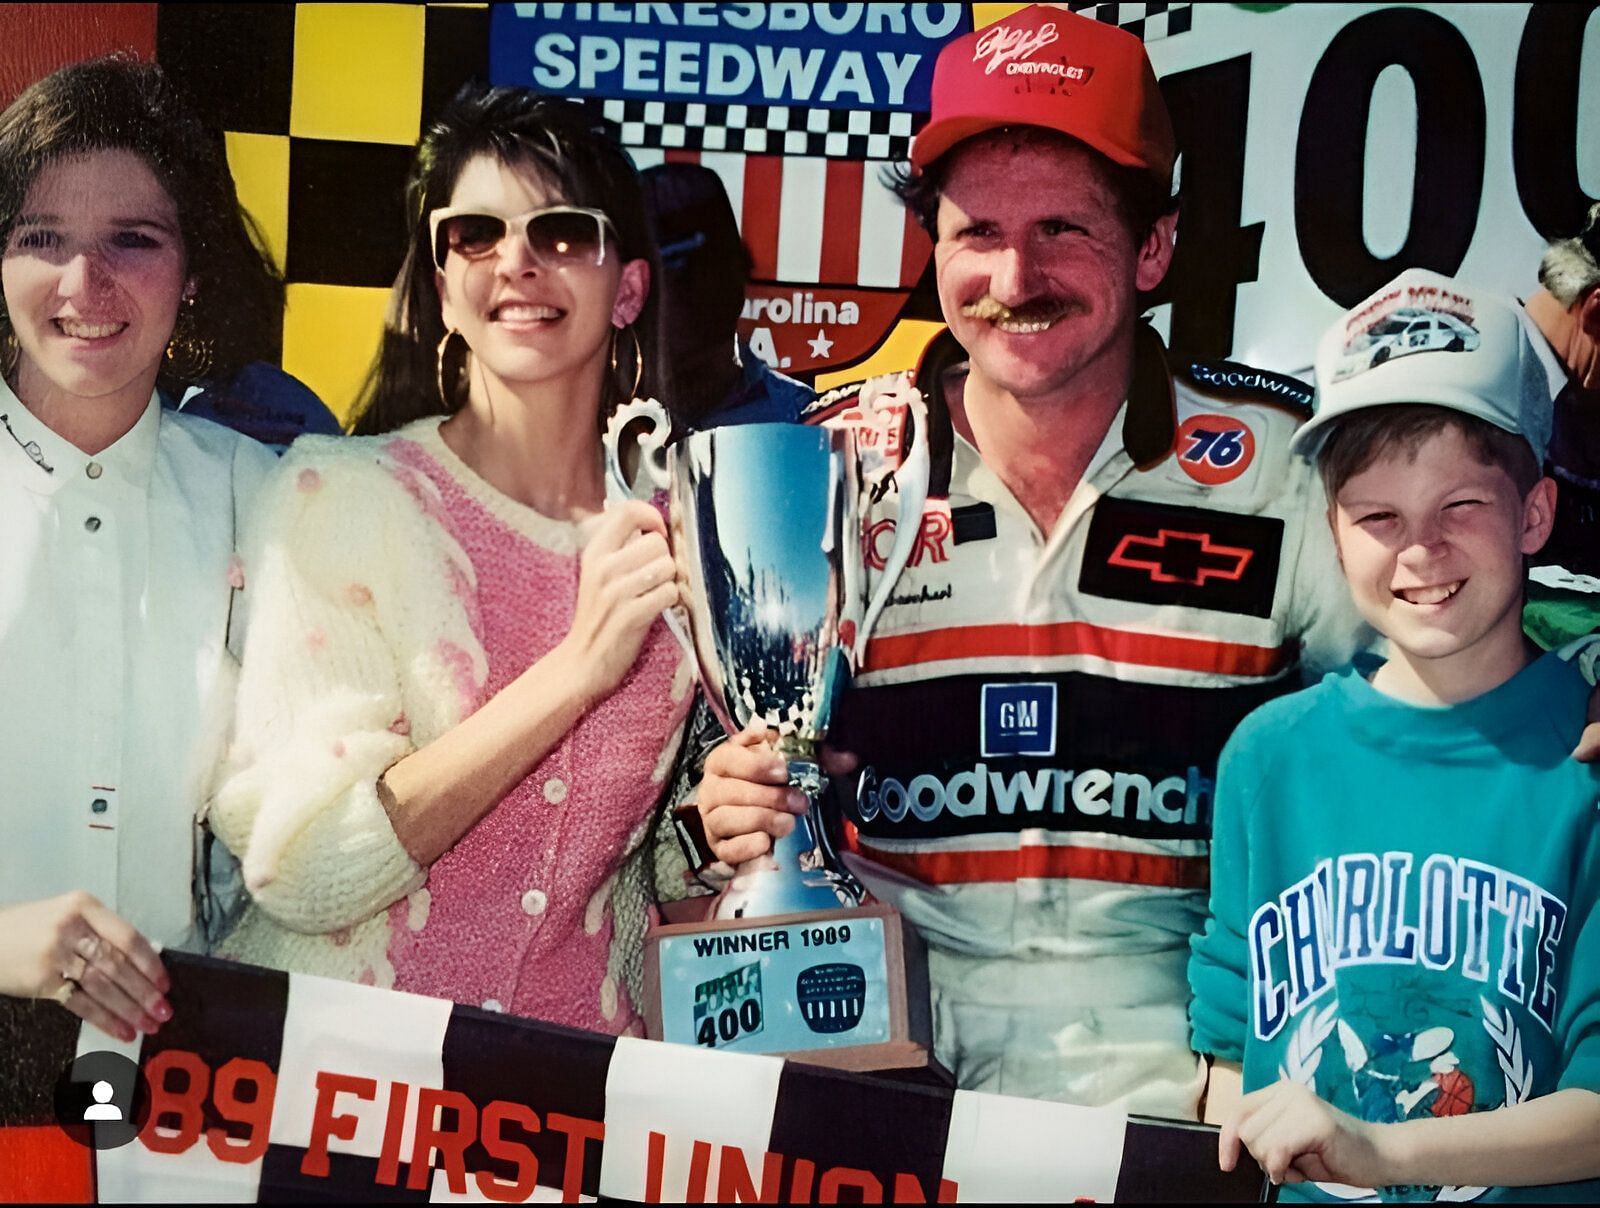 Dale Earnhardt, former #3 driver for Richard Childress Racing and 7-time Cup Series Champion (Photo Credits - Dale Jr